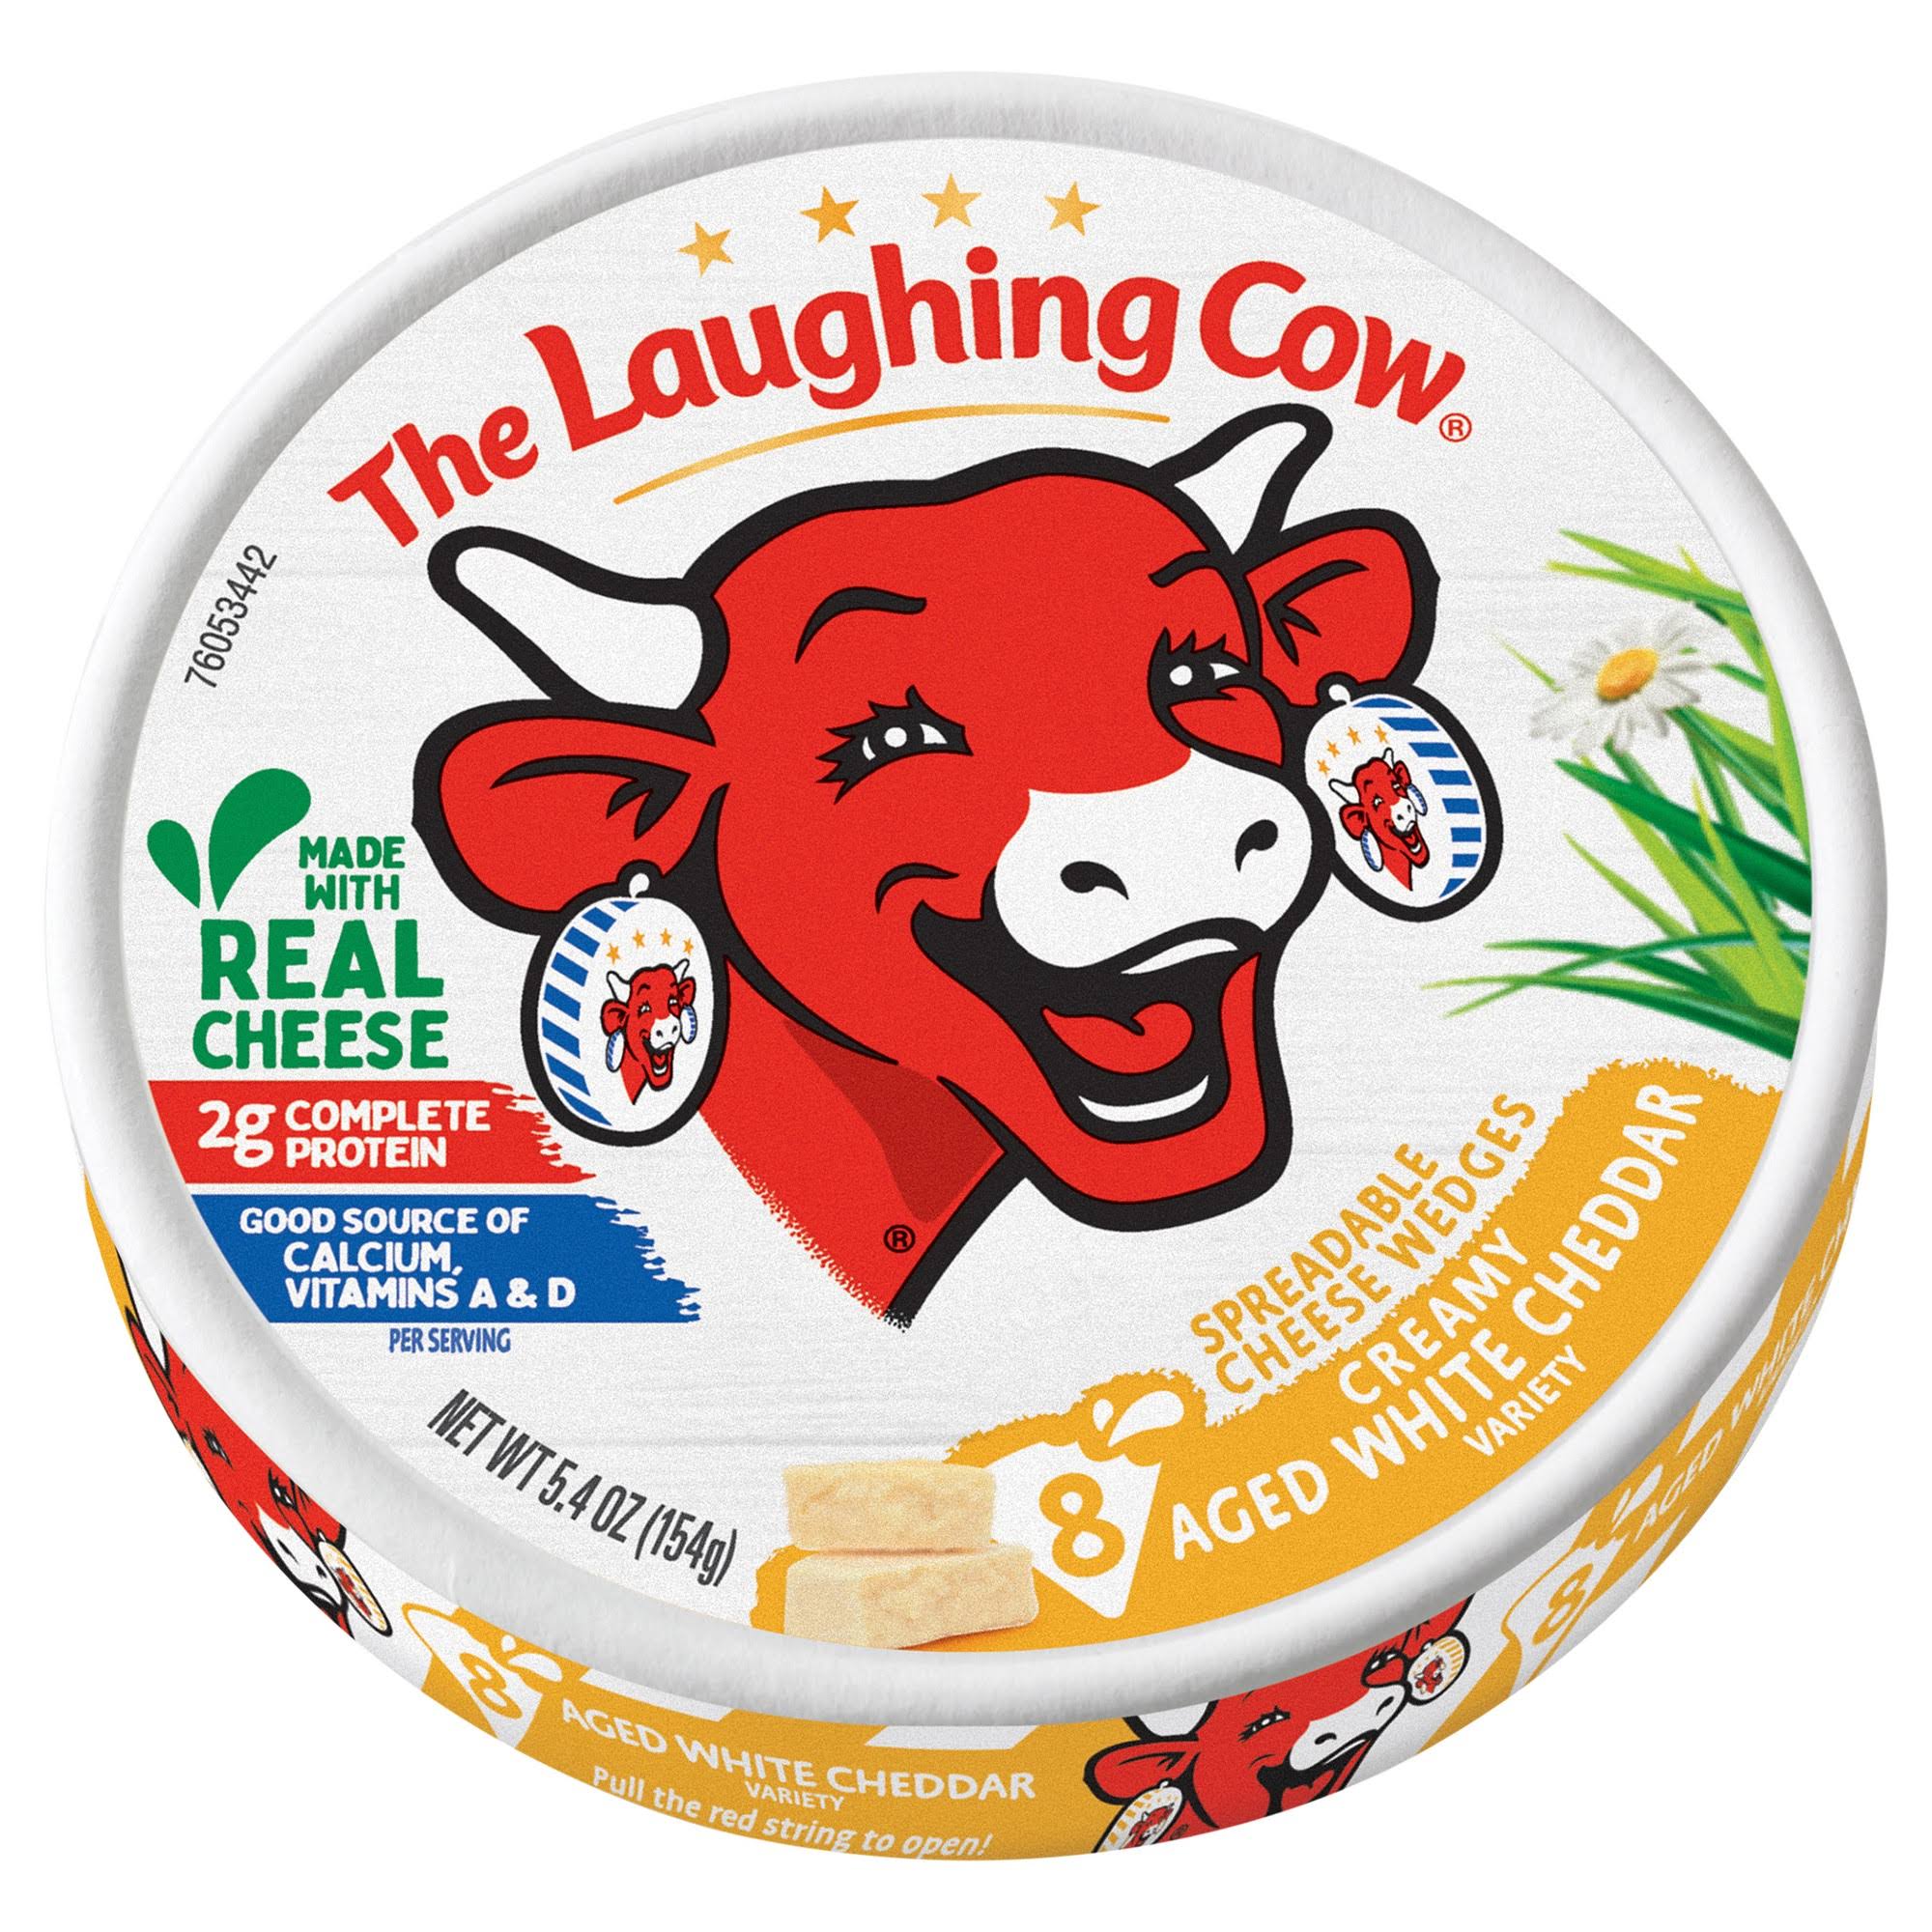 The Laughing Cow Spreadable Creamy Aged White Cheddar Cheese Wedges (8 ct)